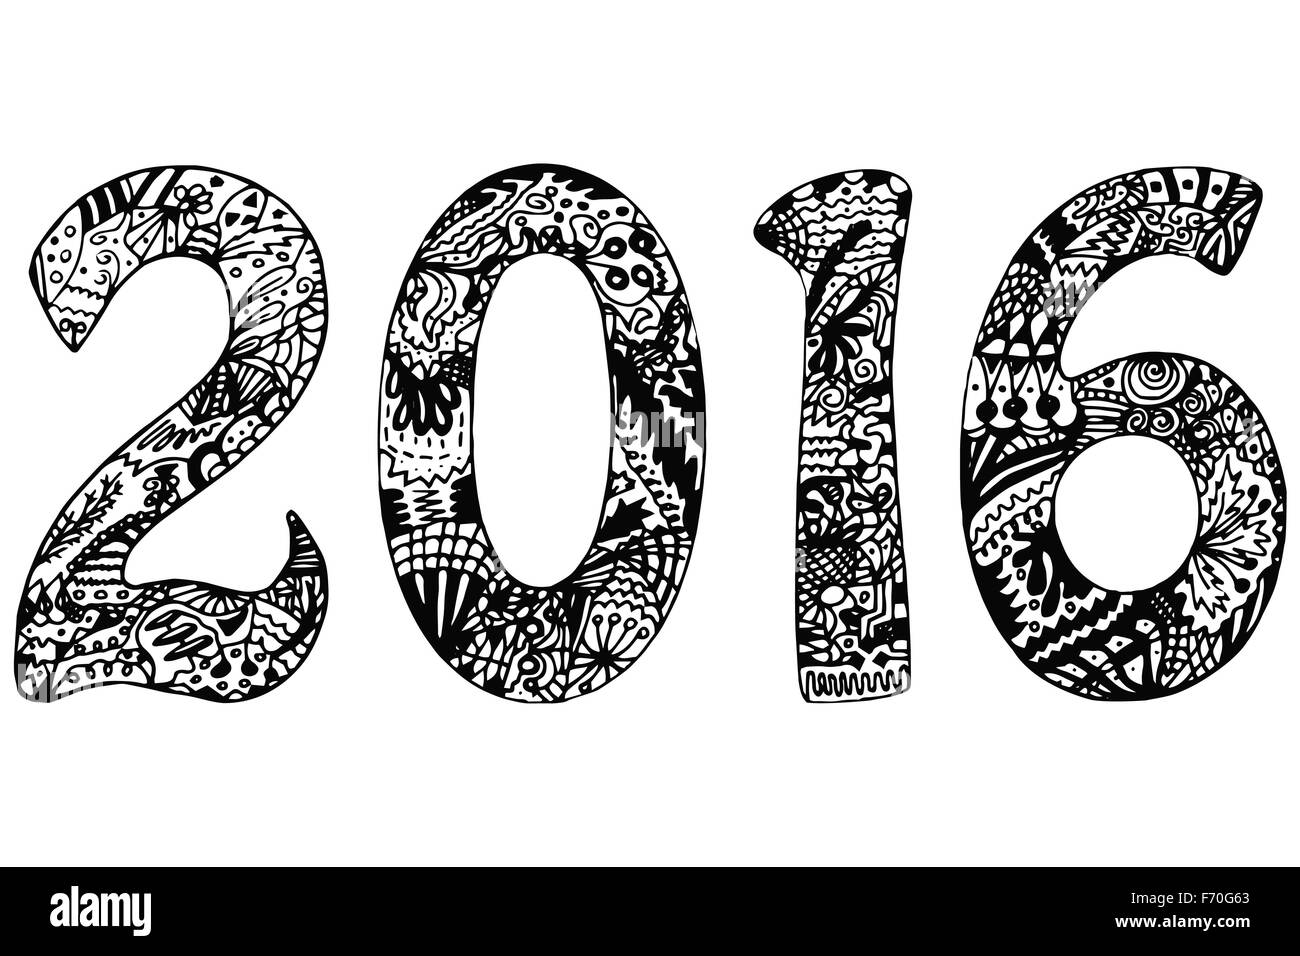 Hand drawn black and white 2016 Stock Vector